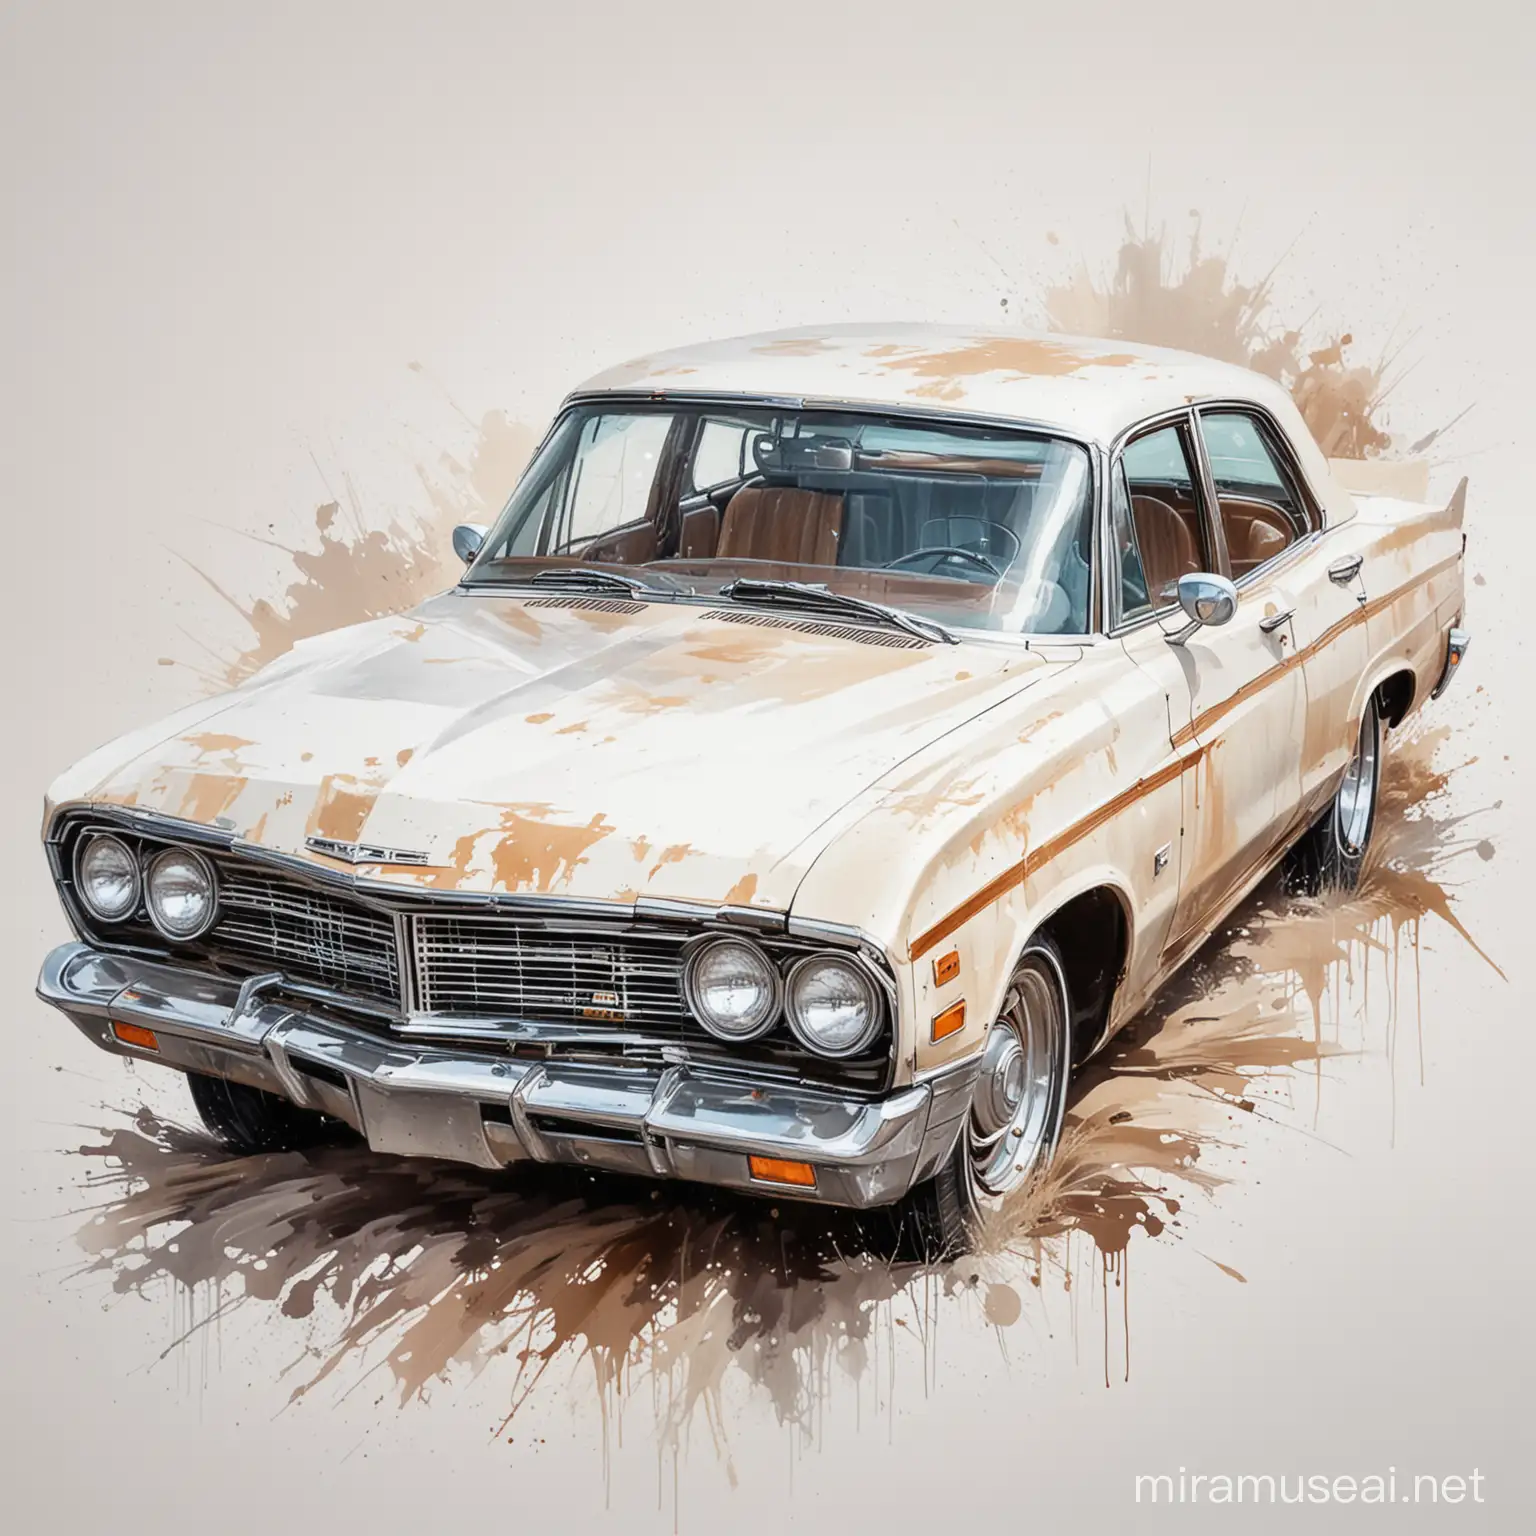 Vintage American Car Abstract Oil Painting on White Background